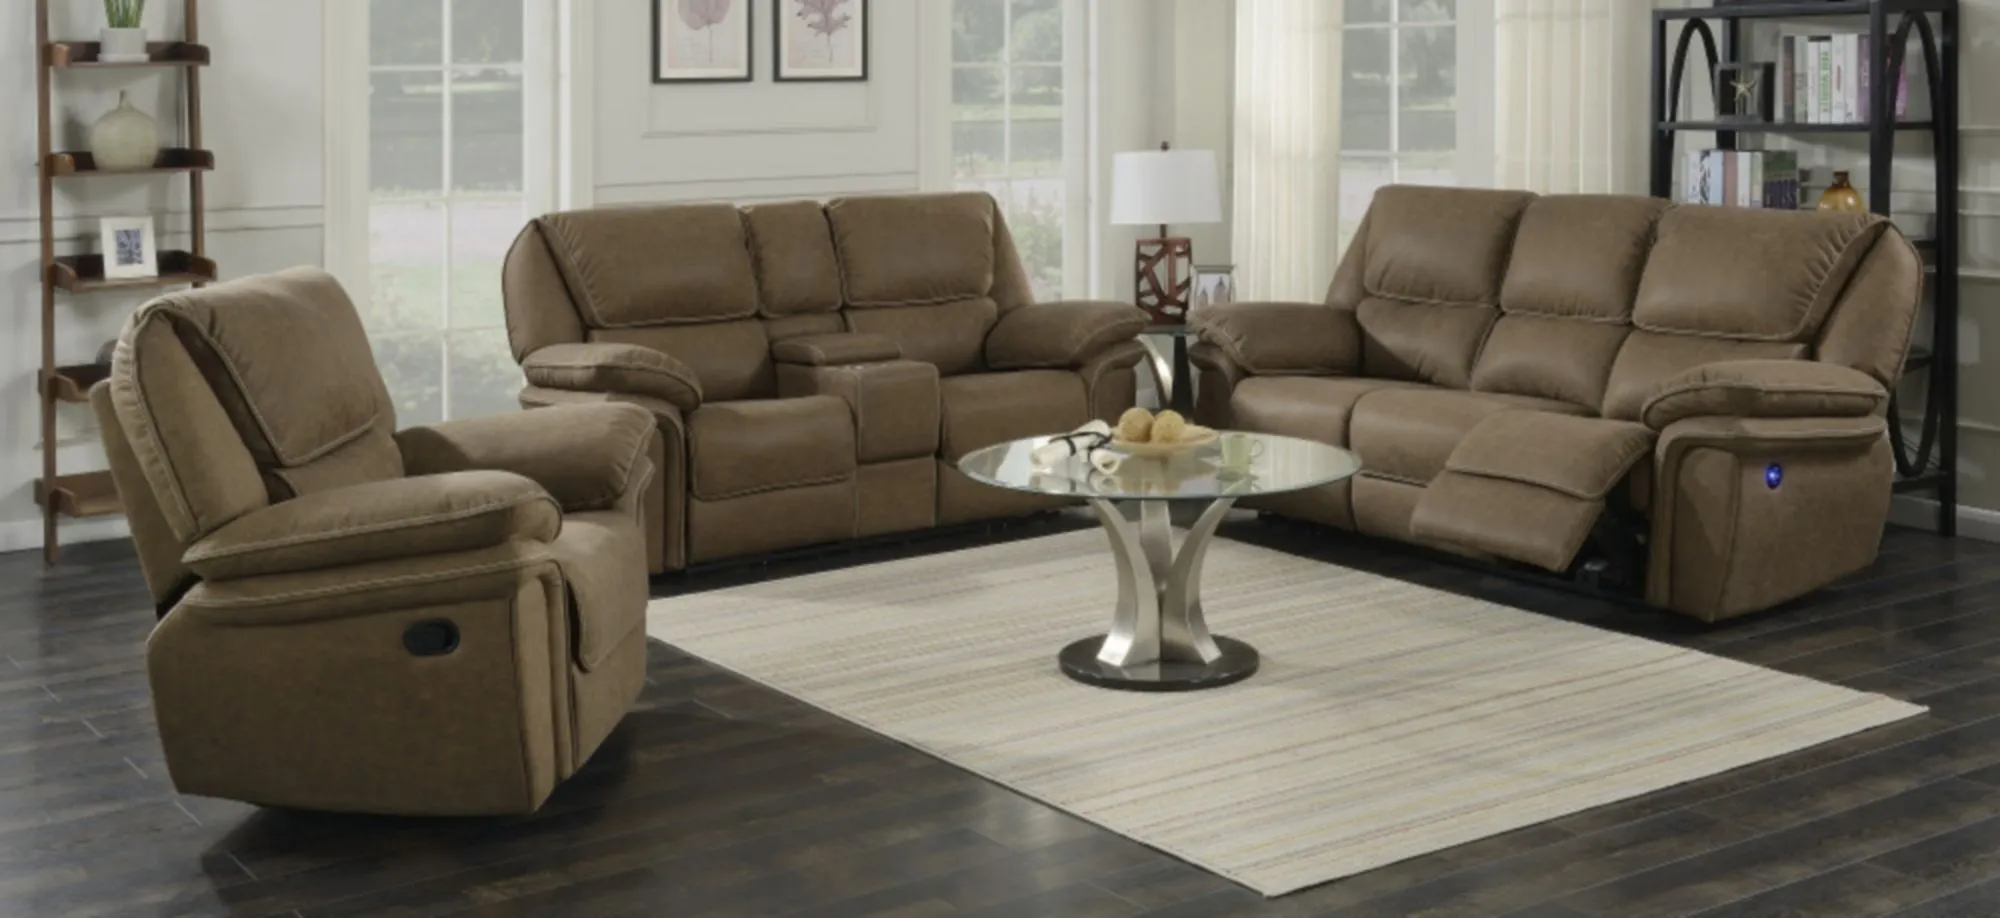 Allyn Power Console Loveseat in Desert Sand by Emerald Home Furnishings